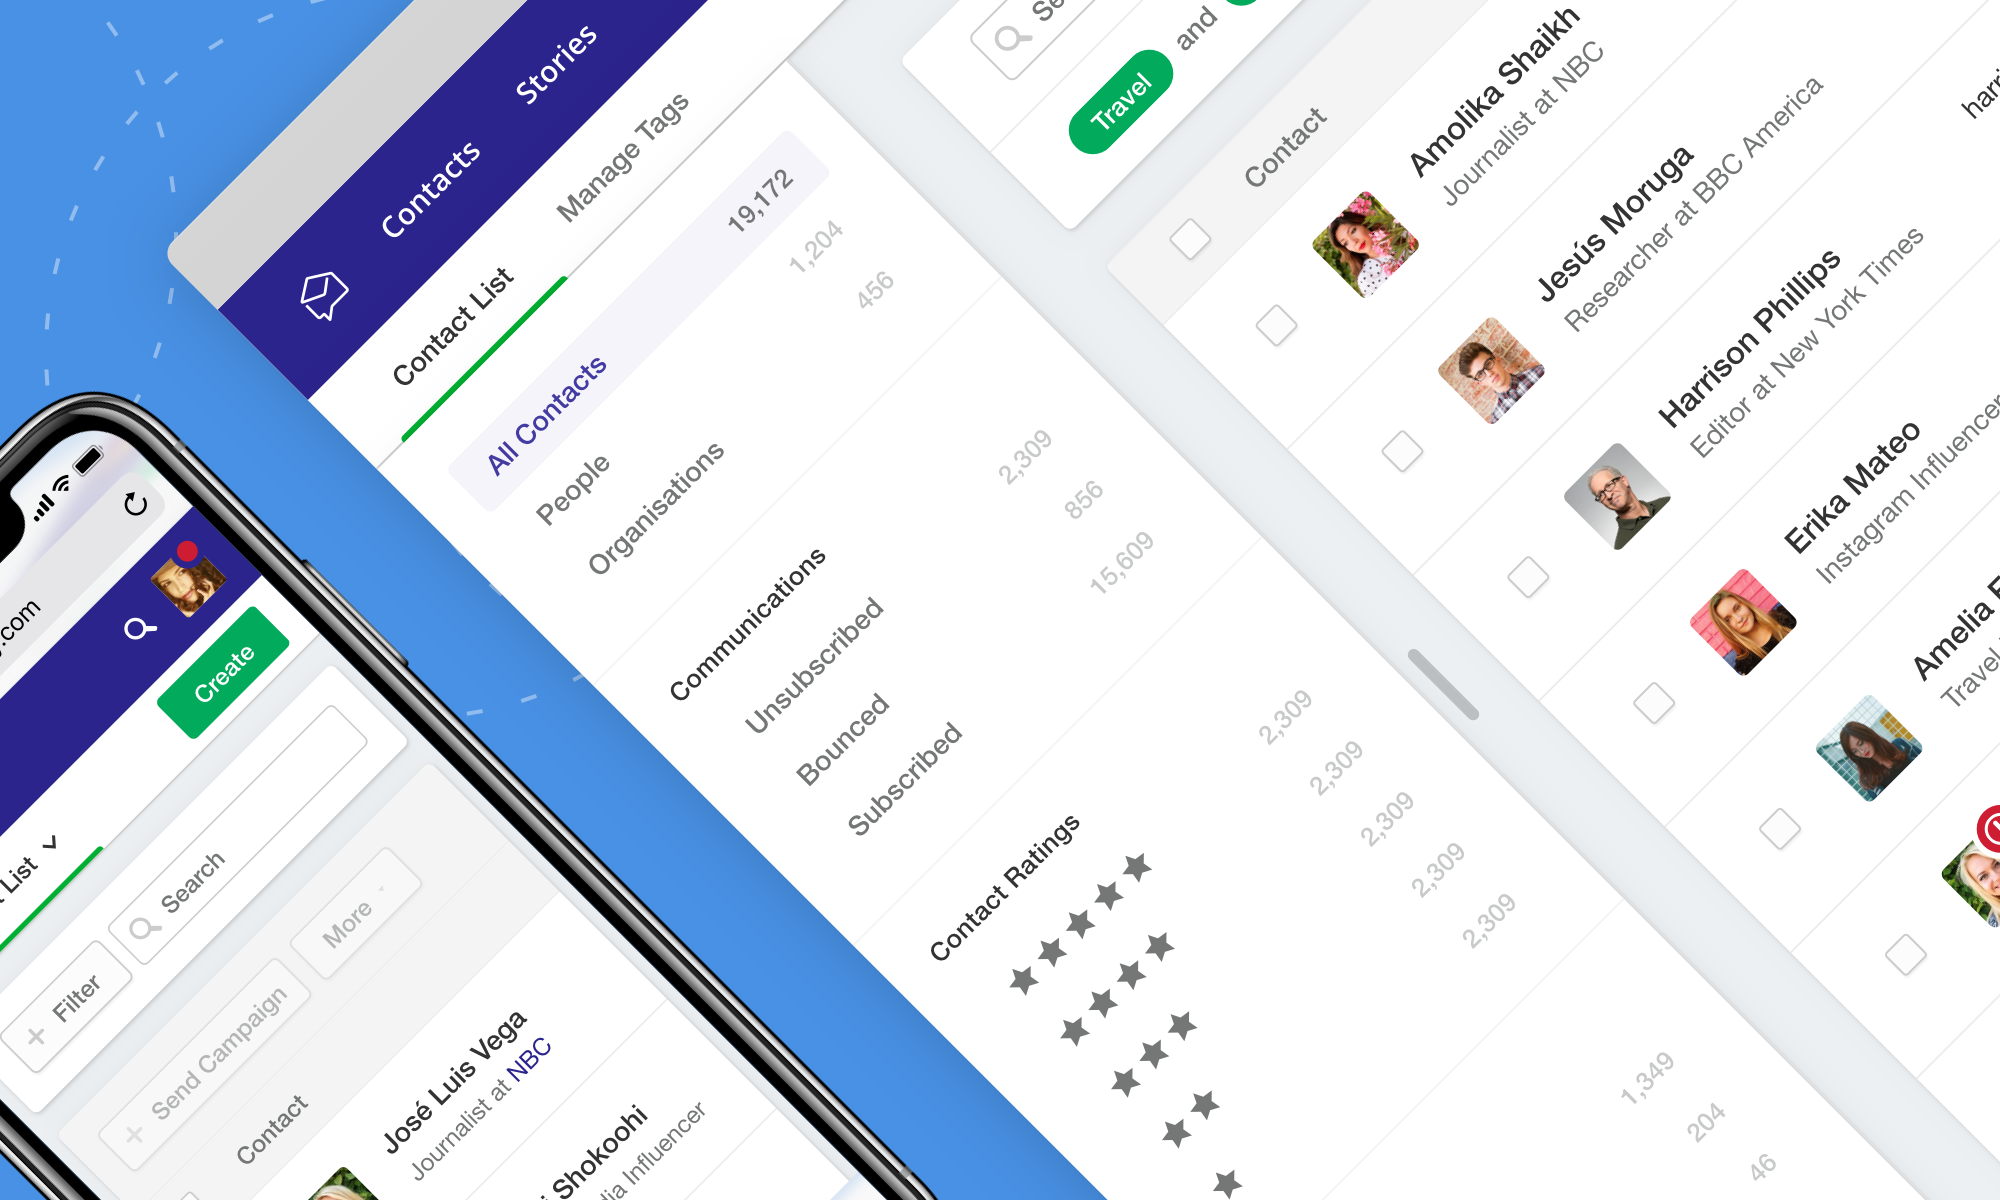 News: Improving the way you manage your contacts